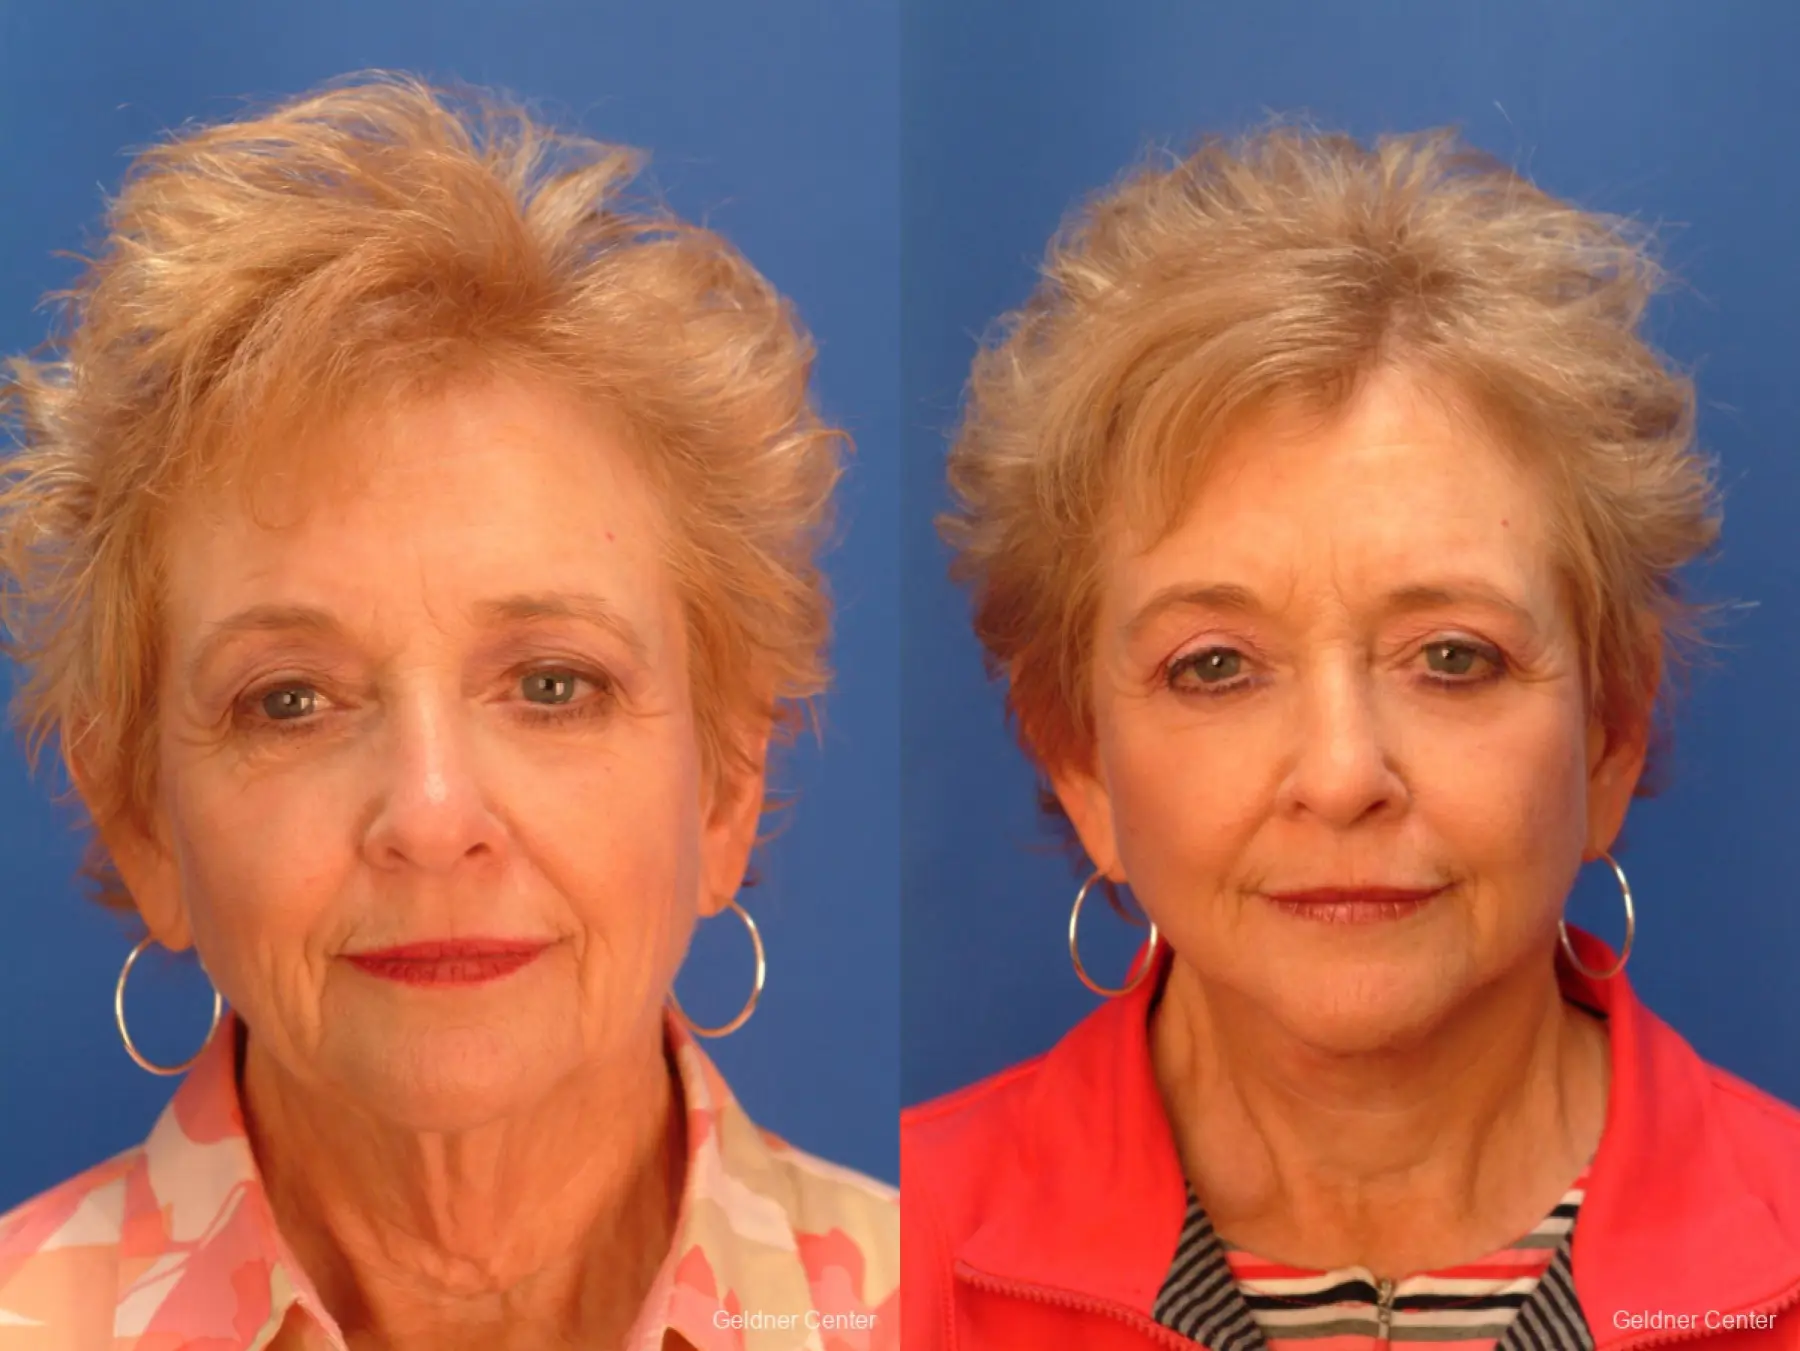 67 year old woman from Chicago, before and after brow lift plastic surgery - Before and After